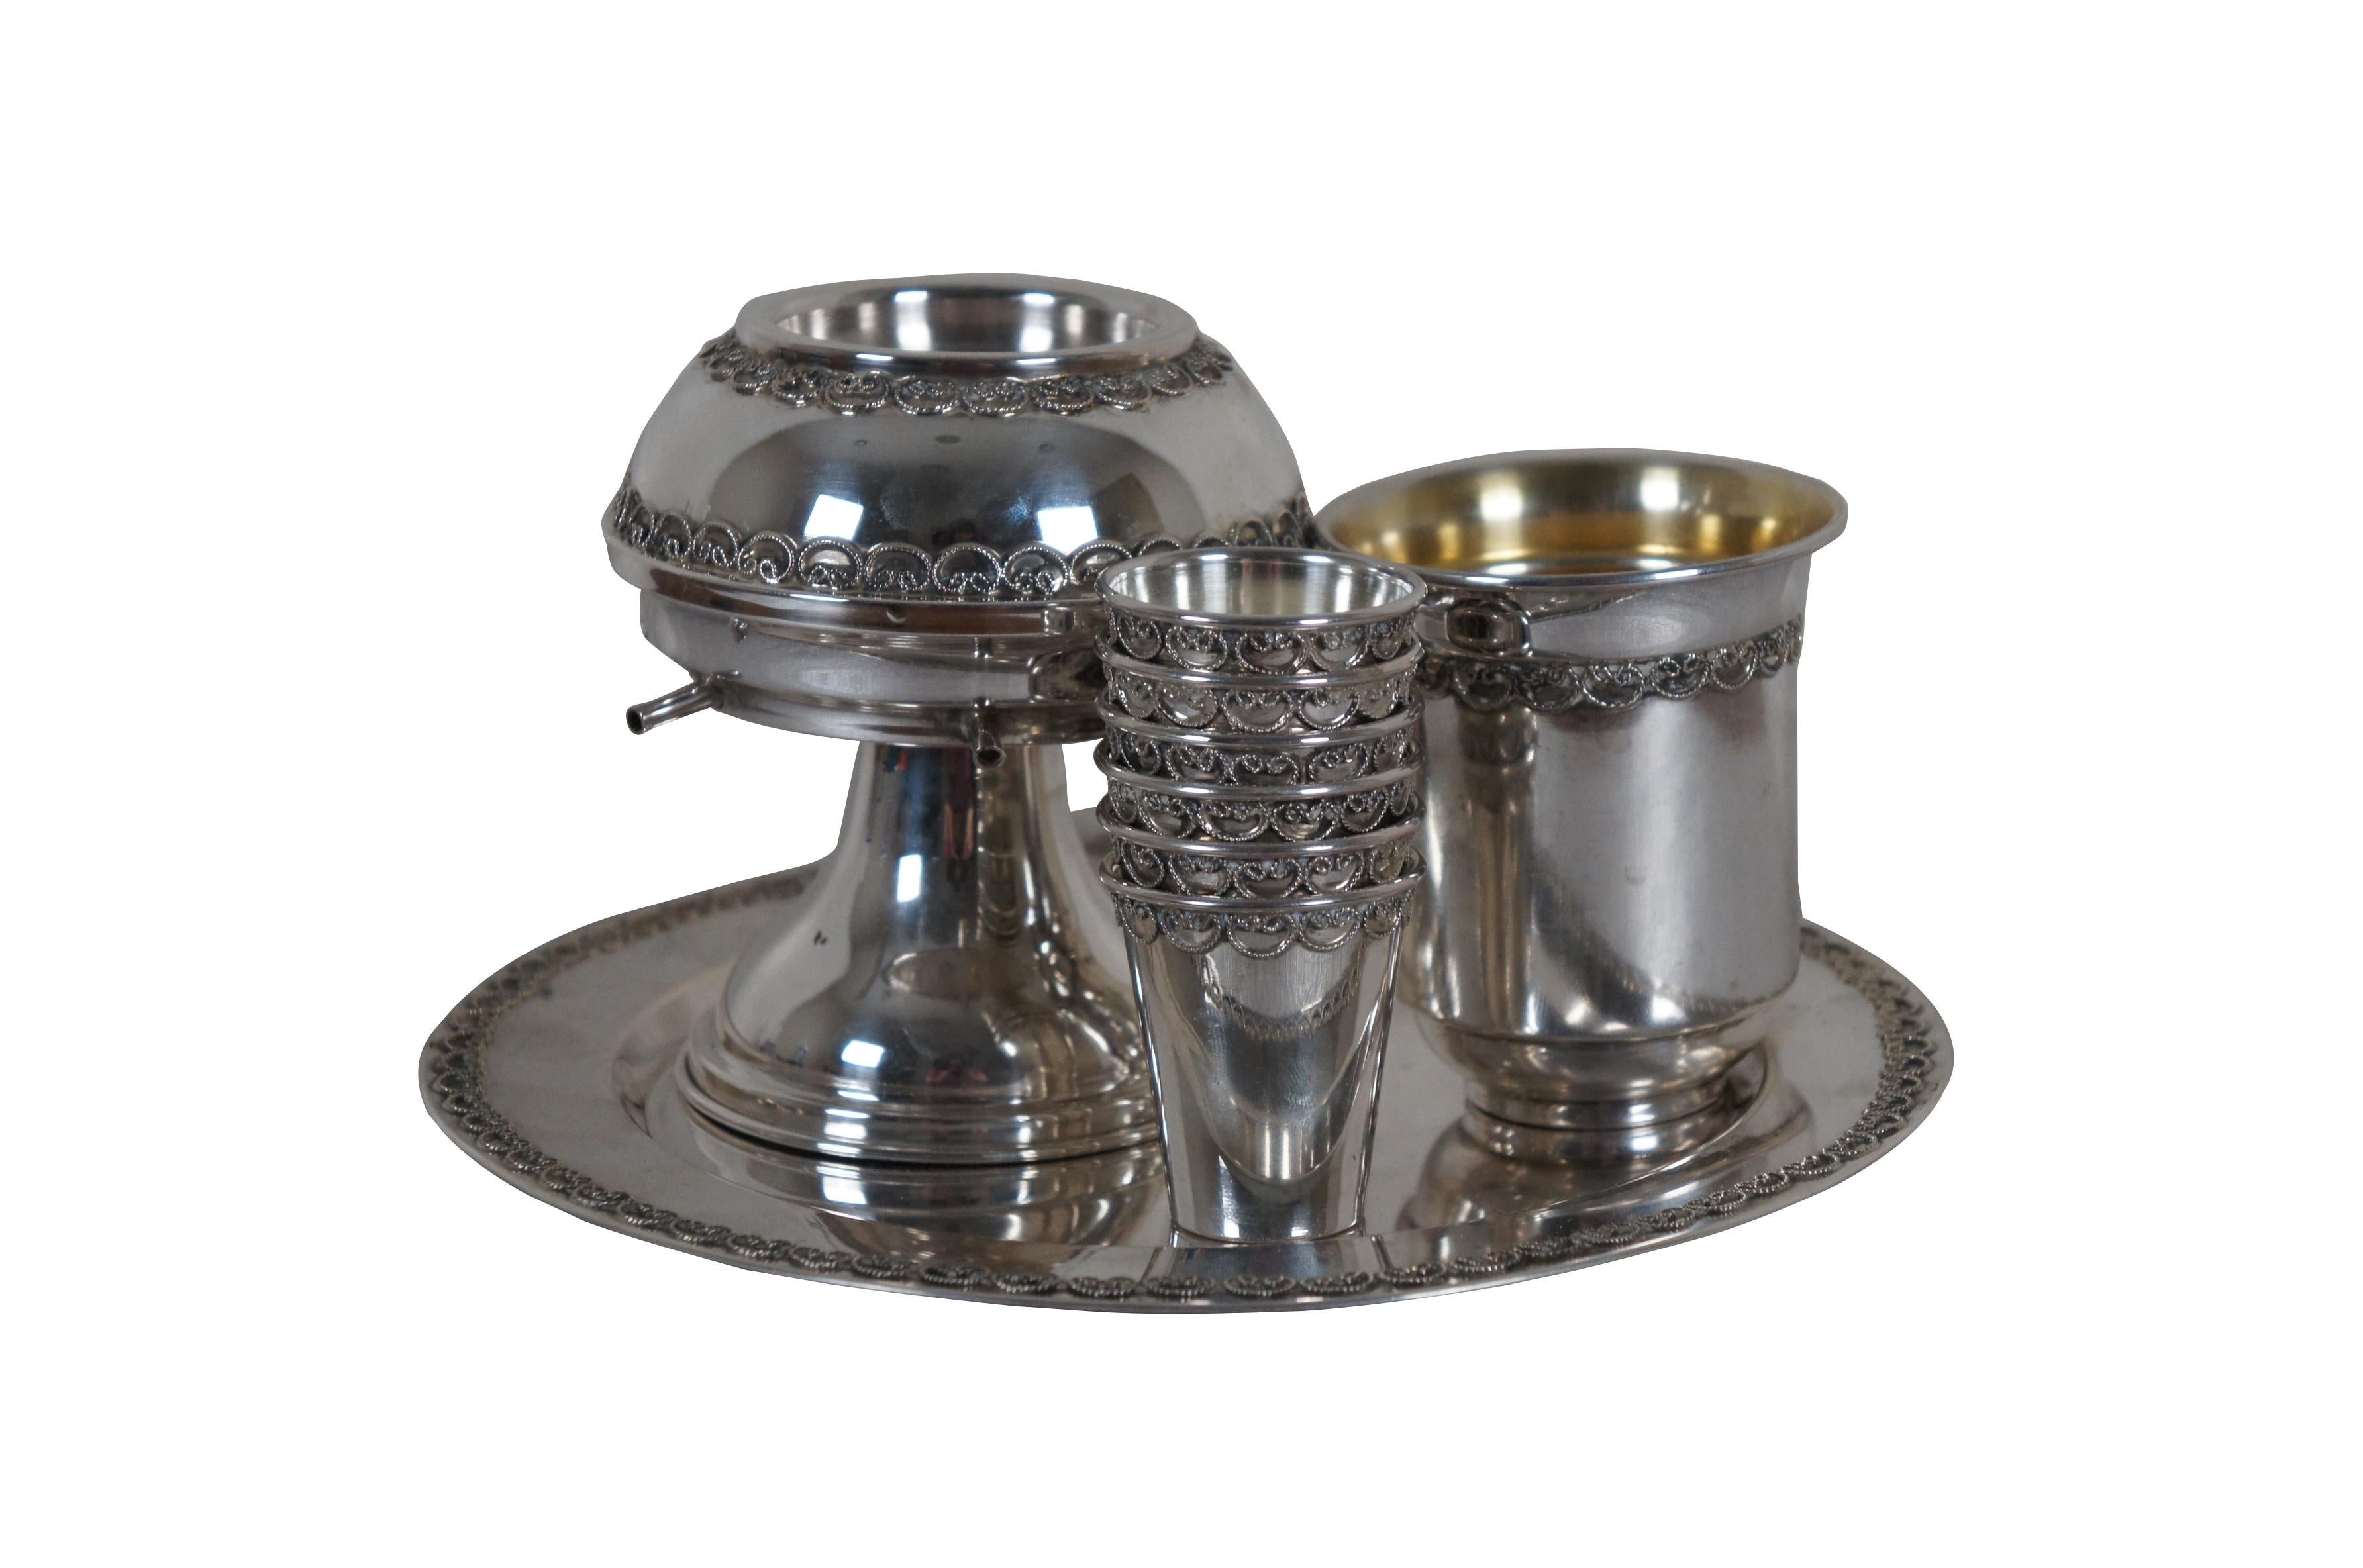 Vintage 925 sterling silver kiddush wine fountain set, decorated with bands of repeated filigree swirls. Set includes six cups, underplate, fountain and wine cup. 

Dimensions:
Plate & Wine Fountain - 8.25